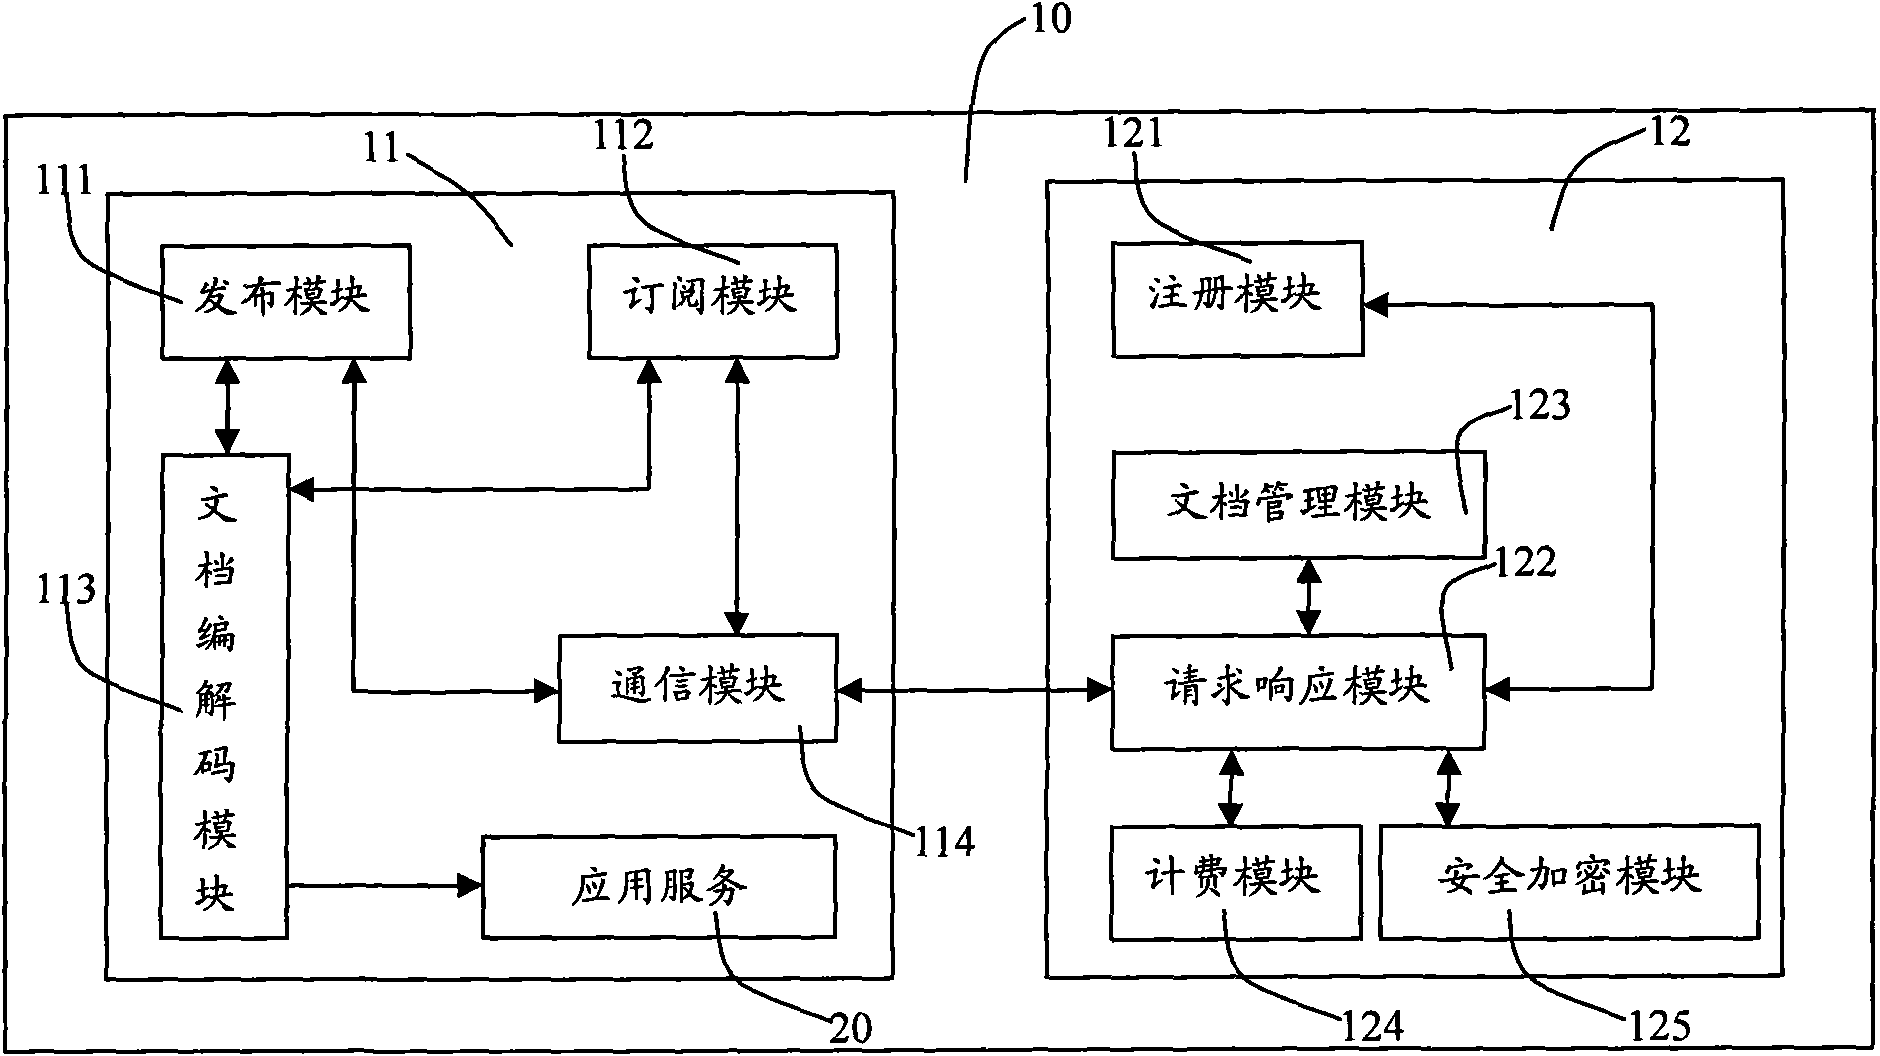 Mobile terminal application service sharing system and sharing method